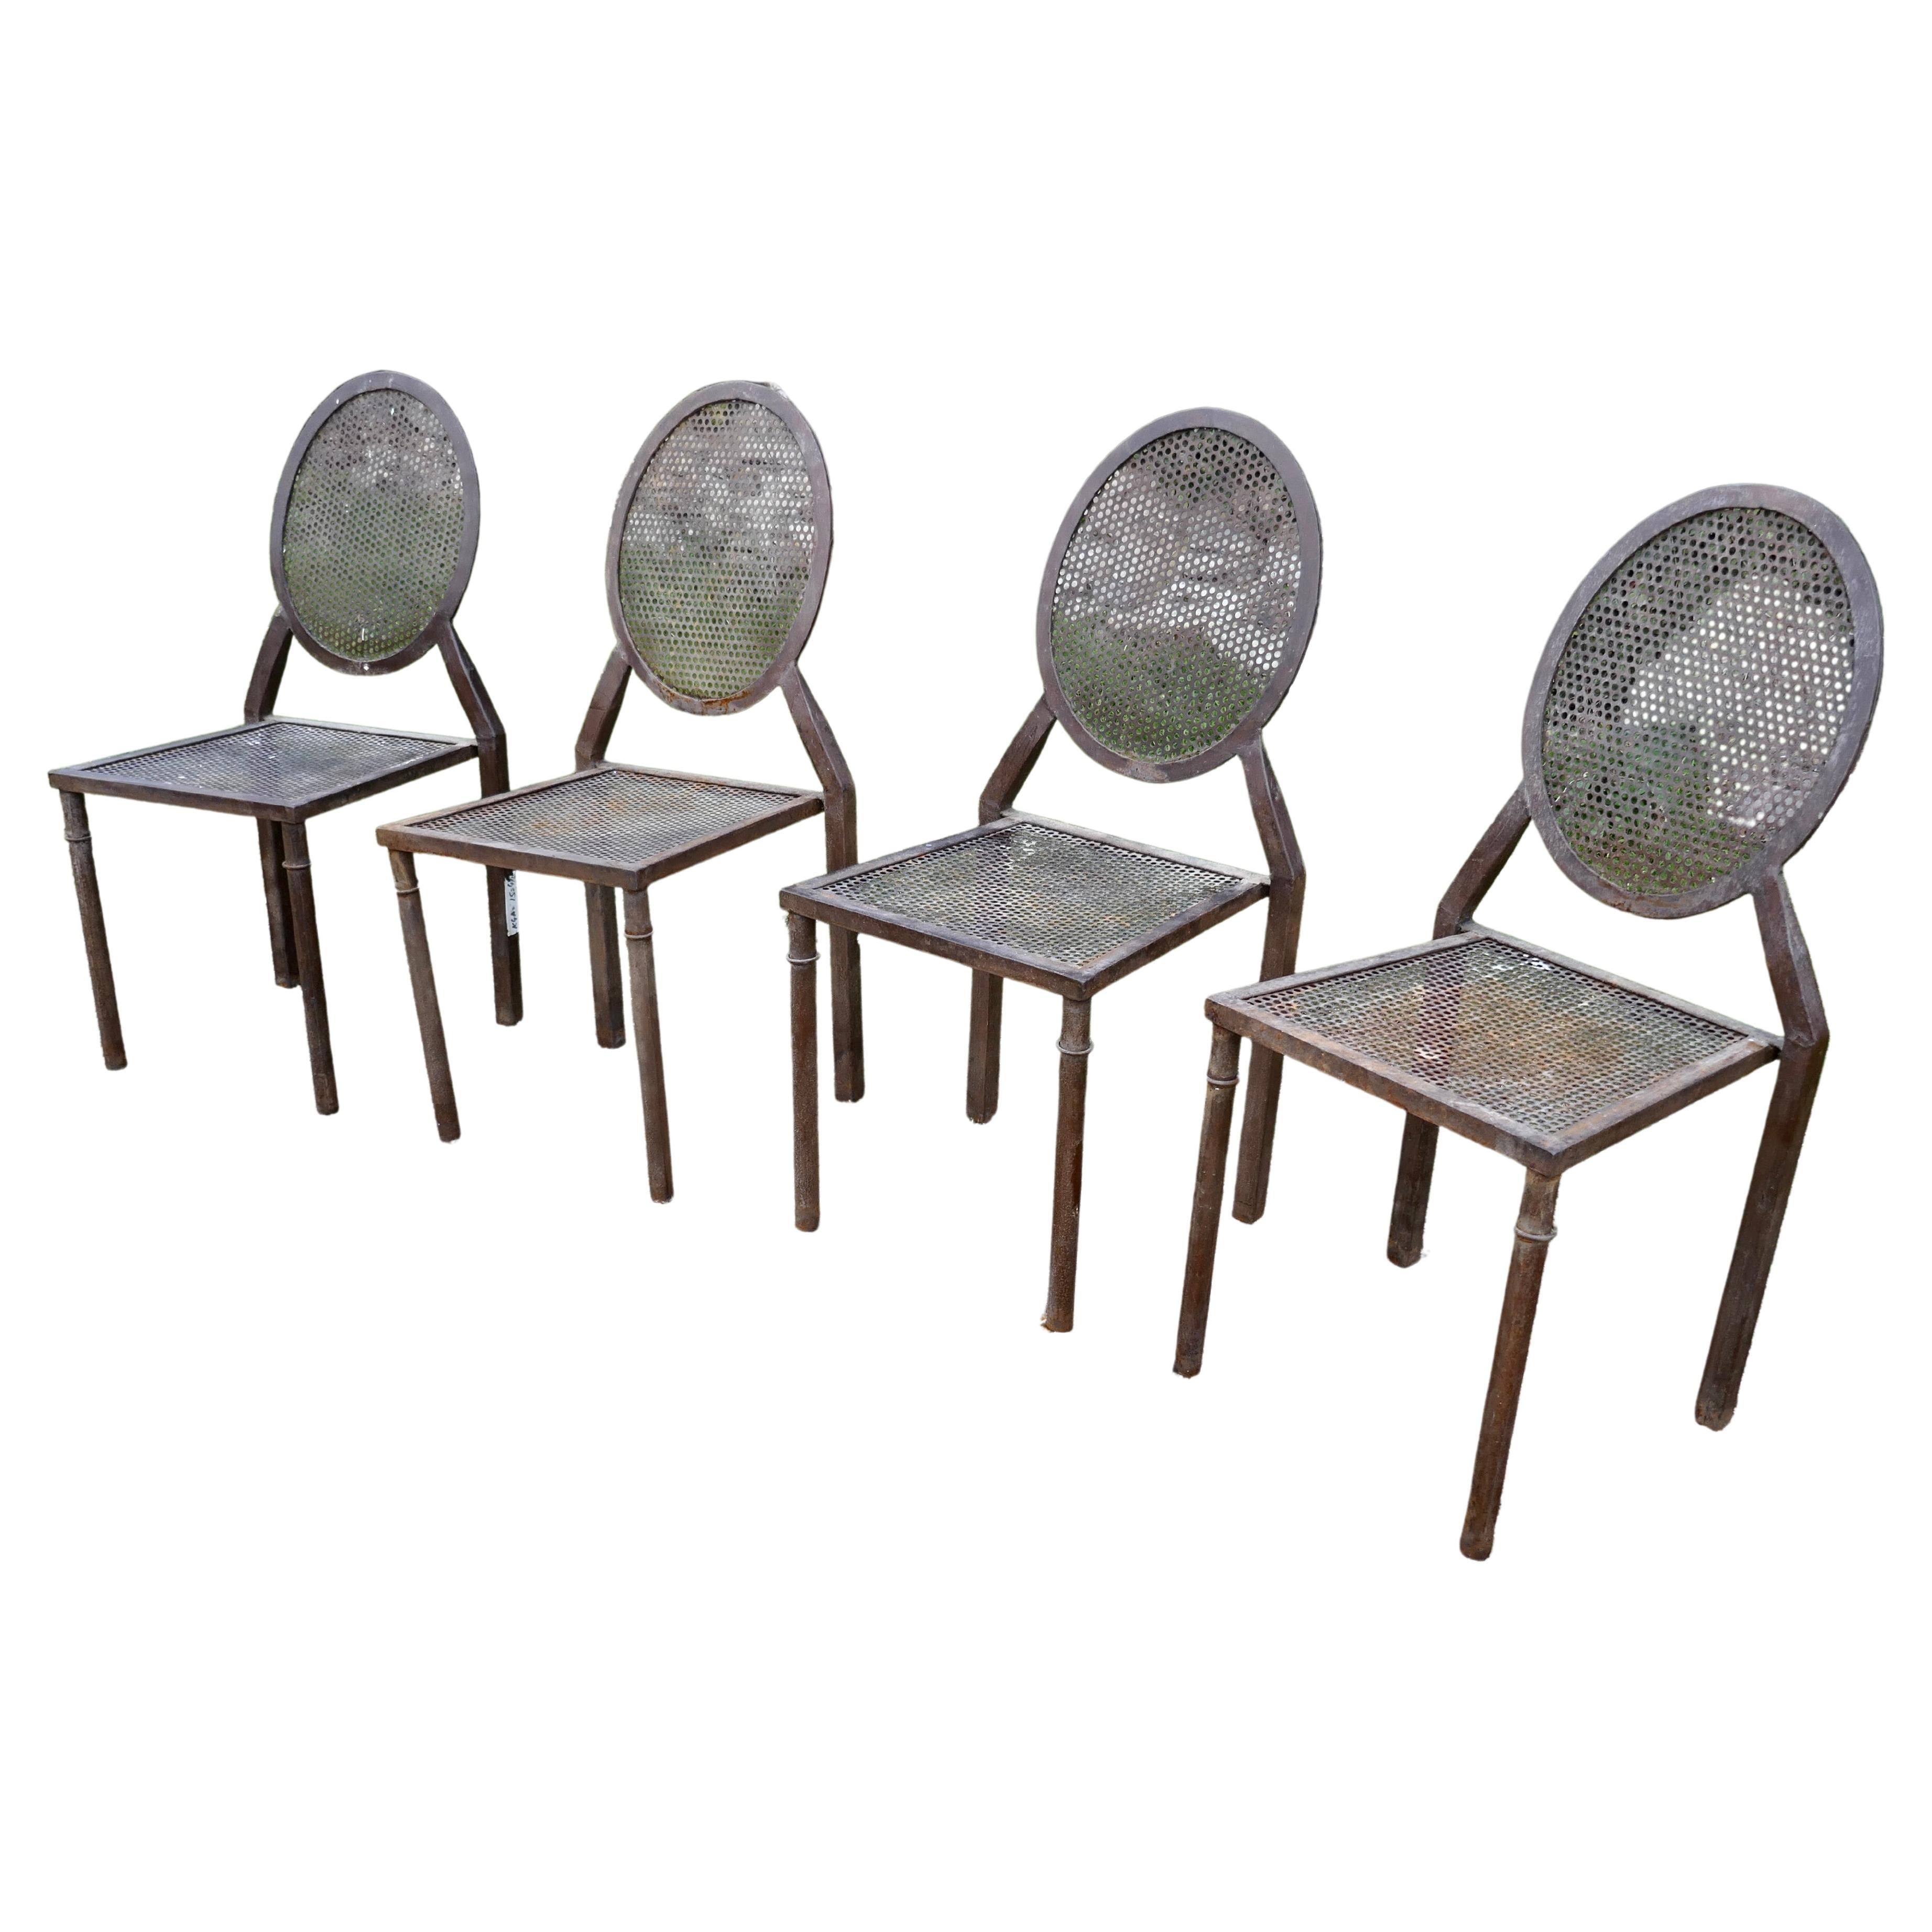 Set of 4 Brutalist Iron Stacking Dining Chairs For Sale